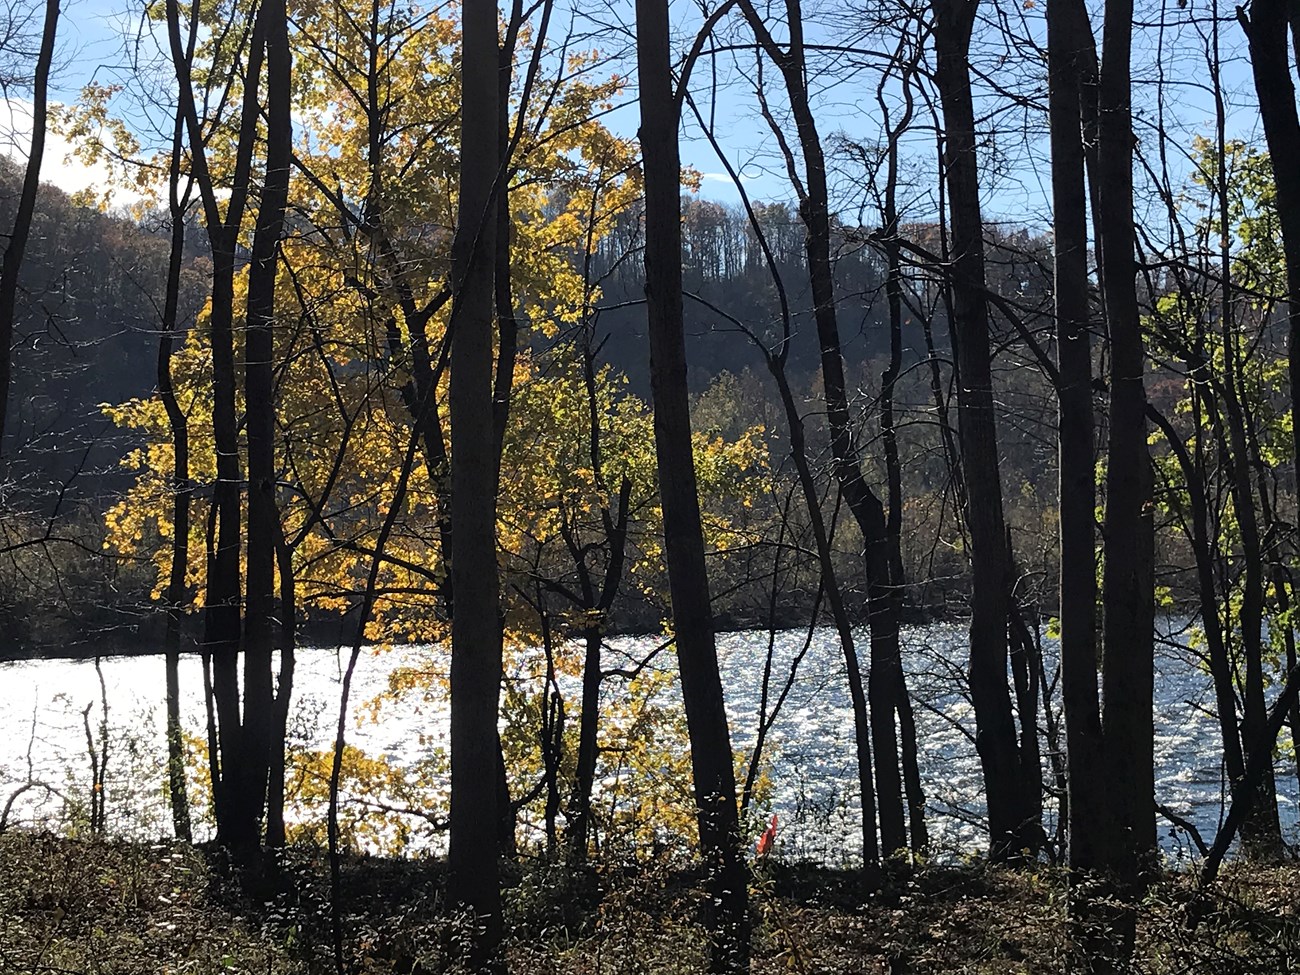 A view on a river through fall trees